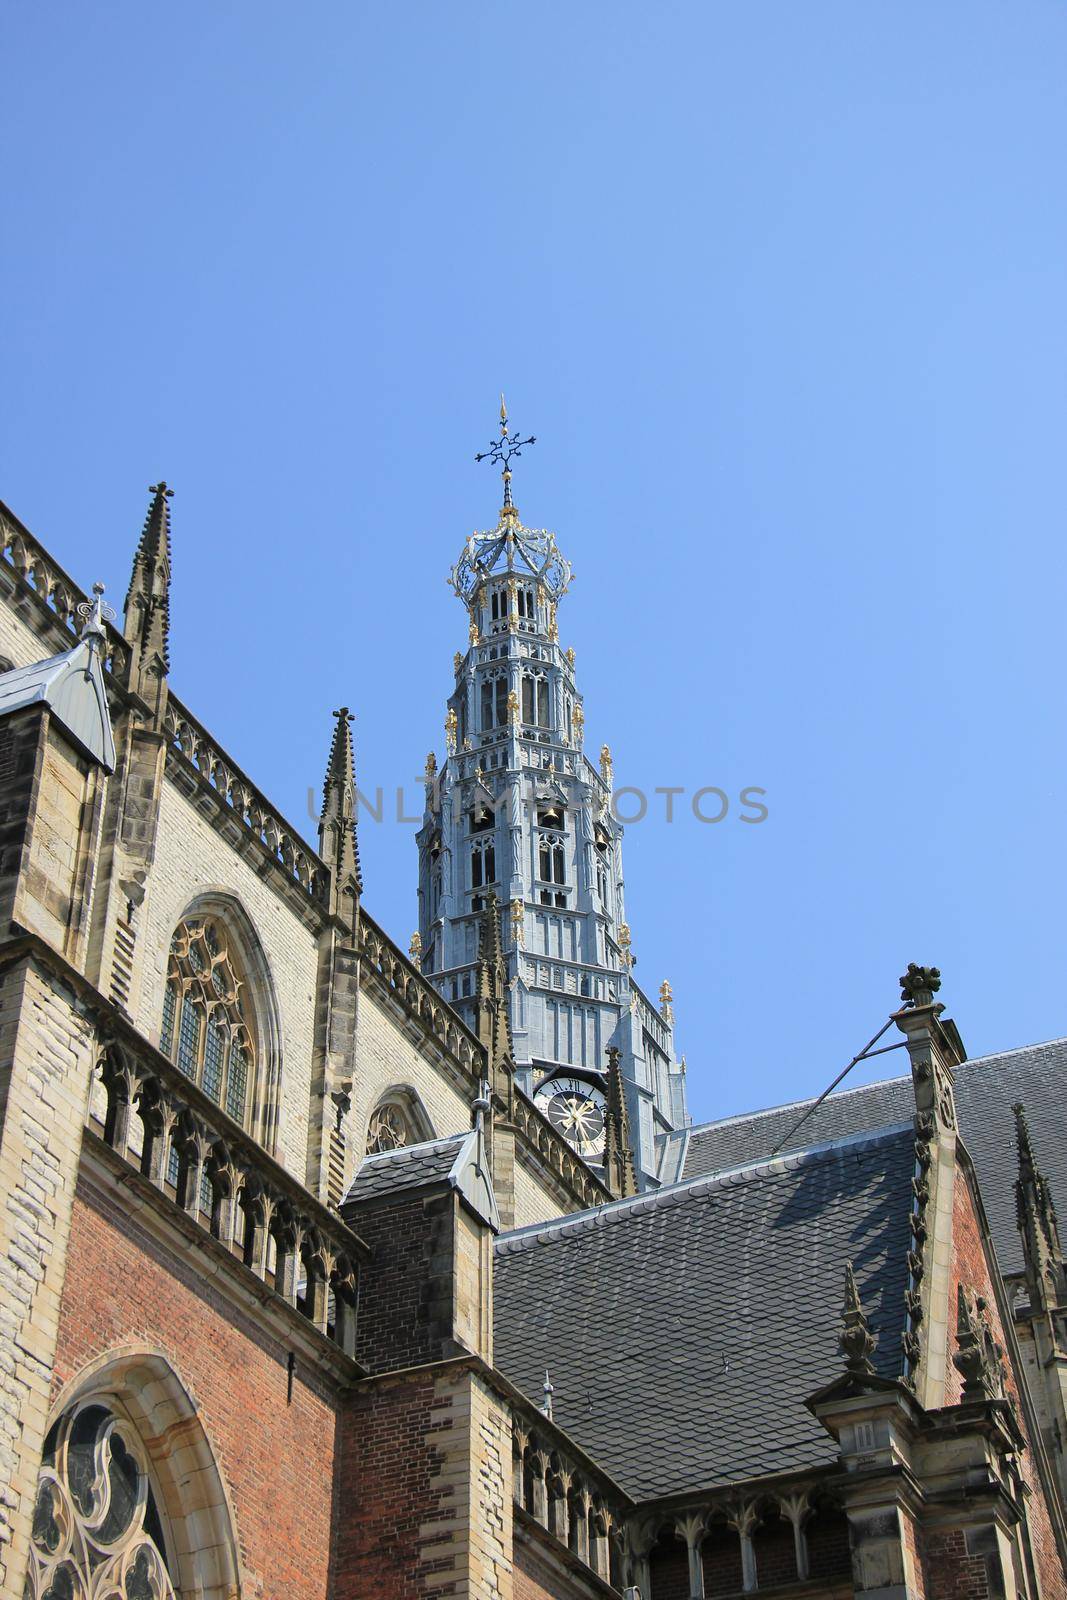 Detail of the great St. Bavo church in Haarlem, the Netherlands